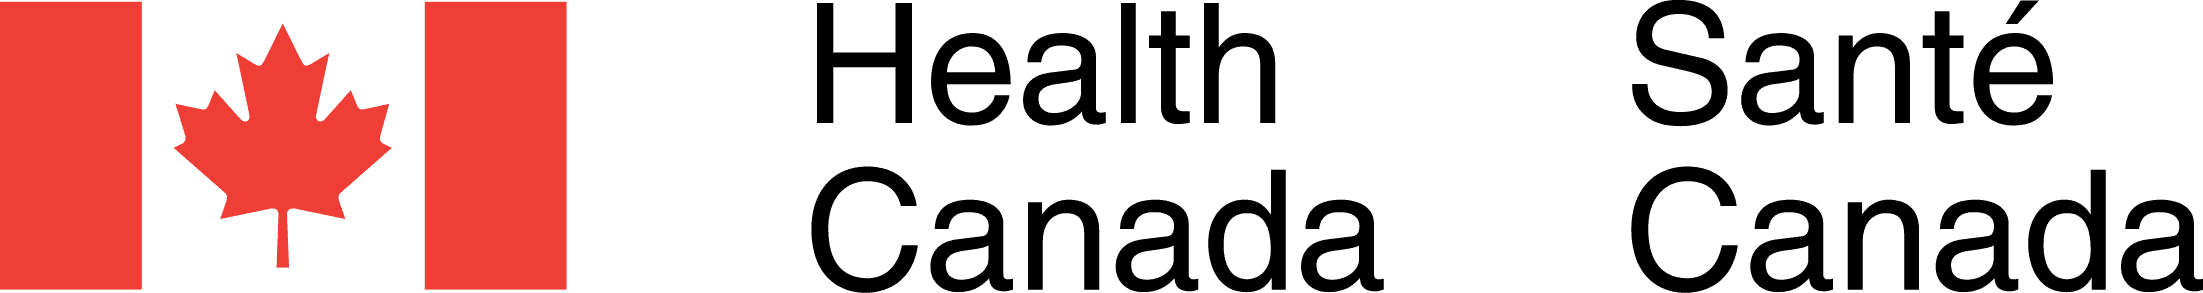 Health Canada logo (red and black)